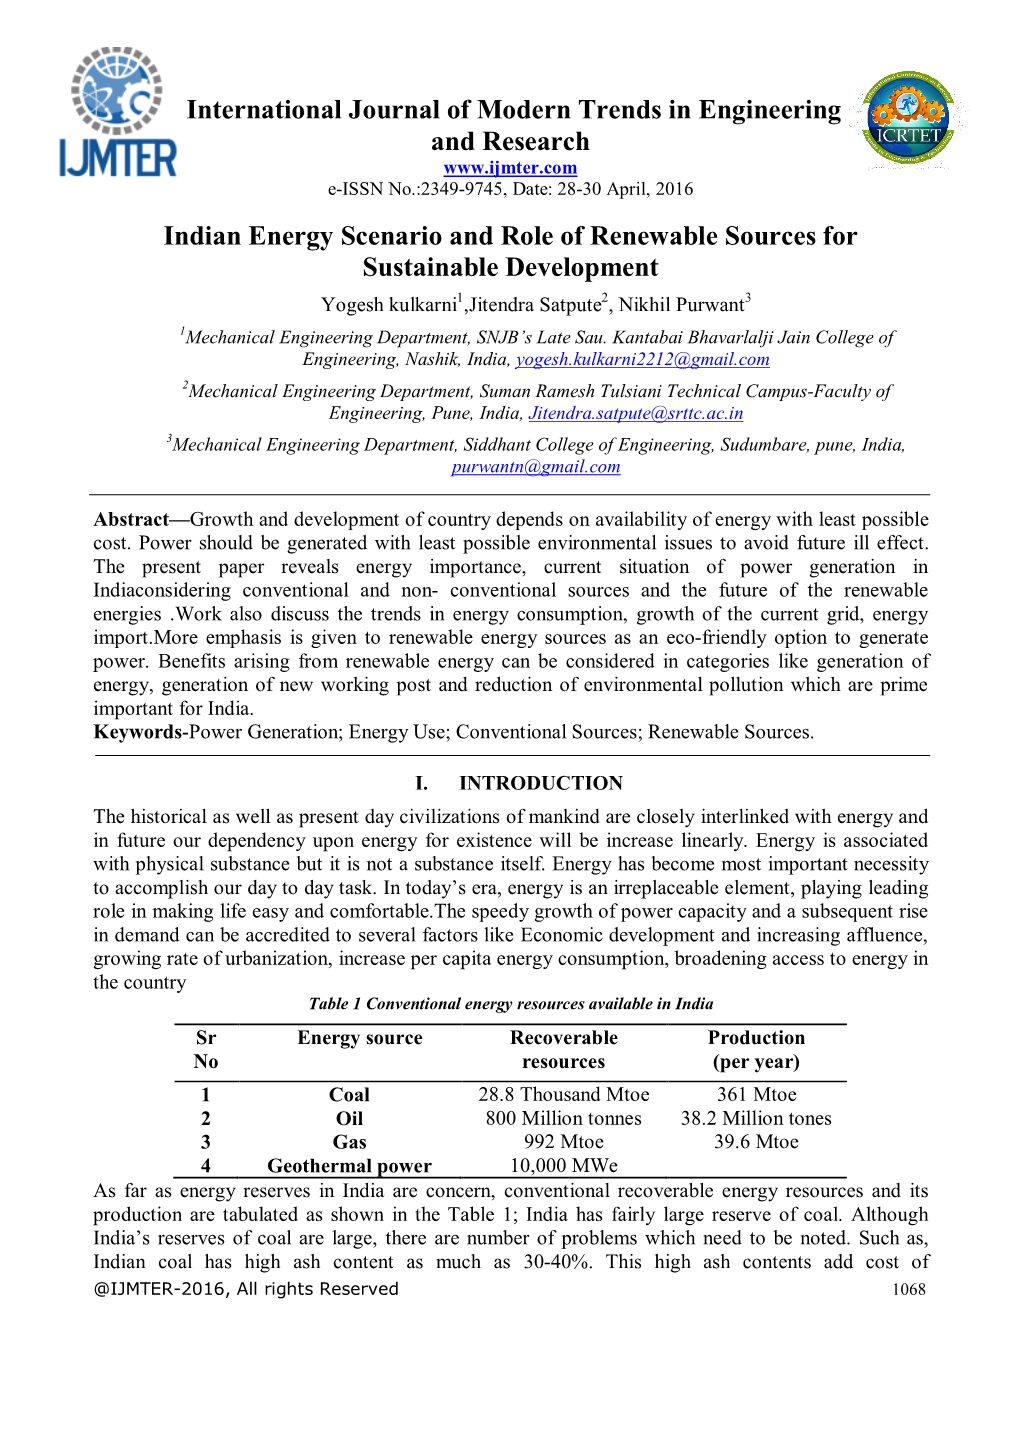 Indian Energy Scenario and Role of Renewable Sources For